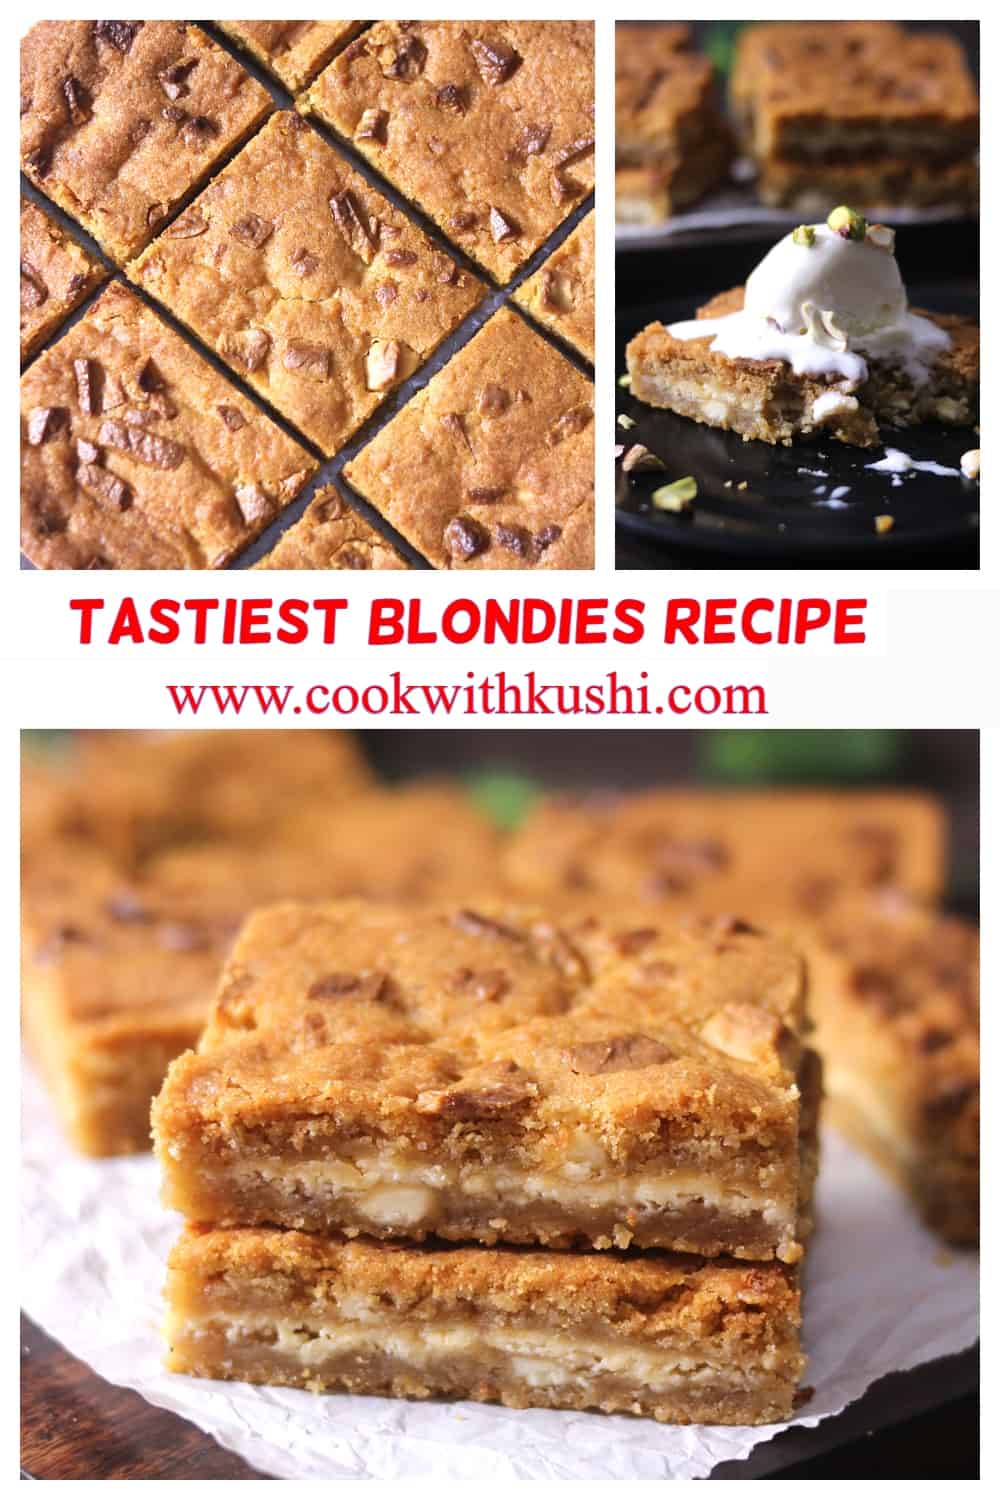 3 different images of best, fudgy, chewy classic blondies recipe